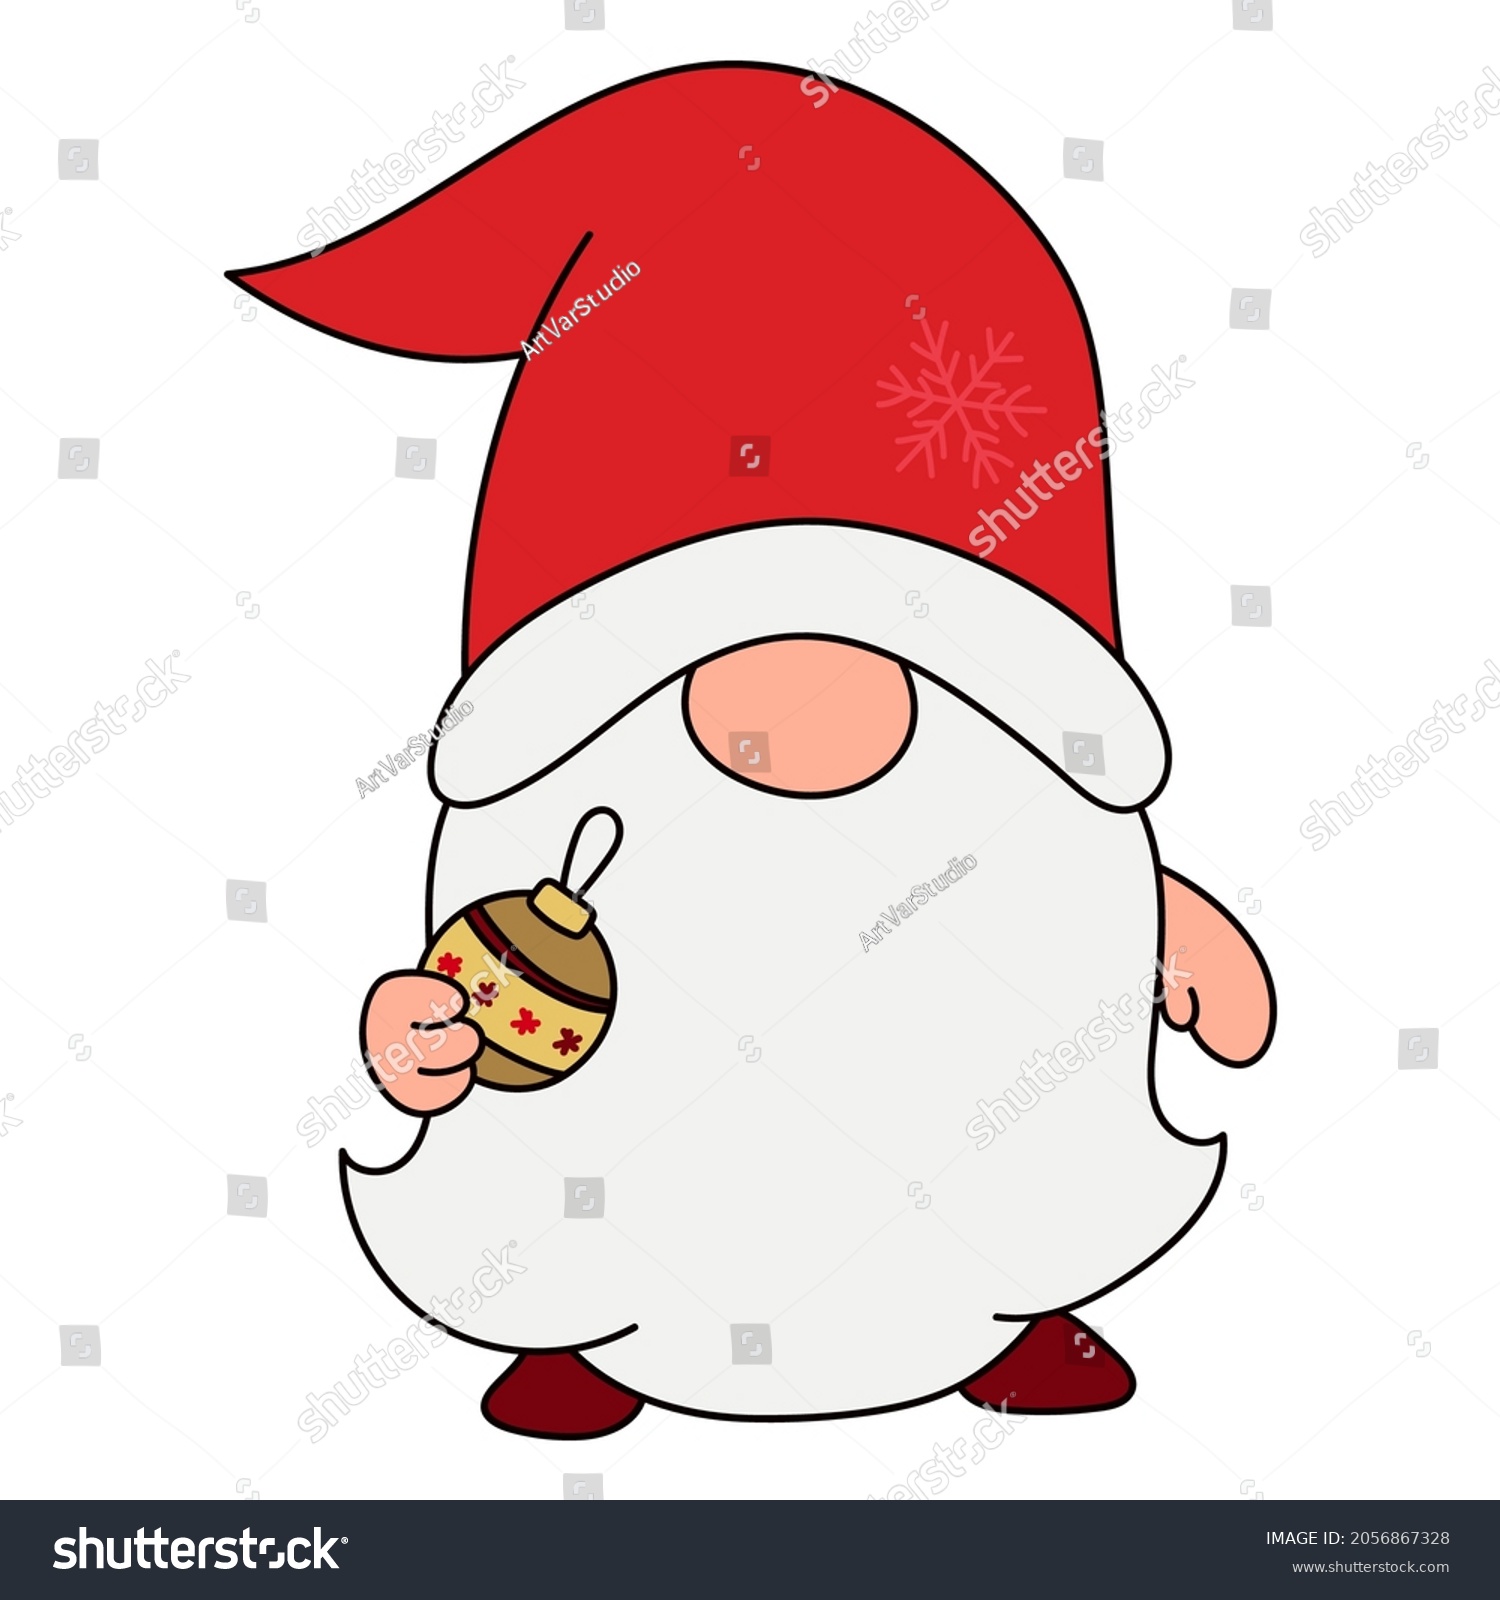 SVG of Cartoon clipart Xmas gnome set for kids activity t shirt print, icon, logo, label, patch or sticker.
Christmas gnome clipart. Vector Christmas character illustration. 
 svg